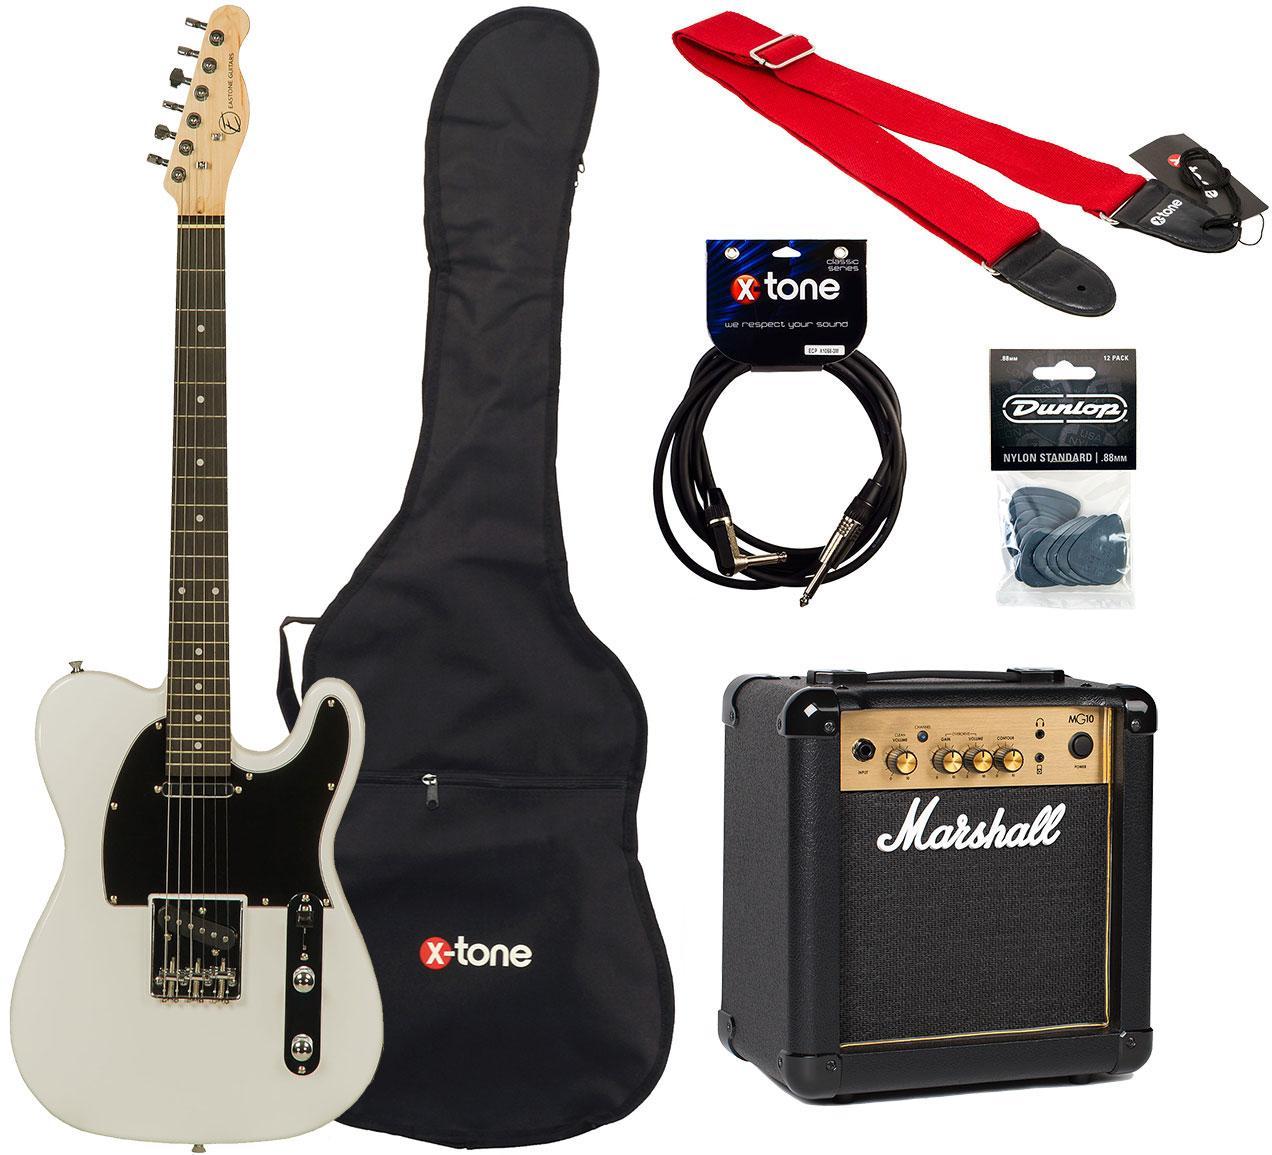 Pack guitare électrique Eastone TL70 +Marshall MG10 +Accessories - Black